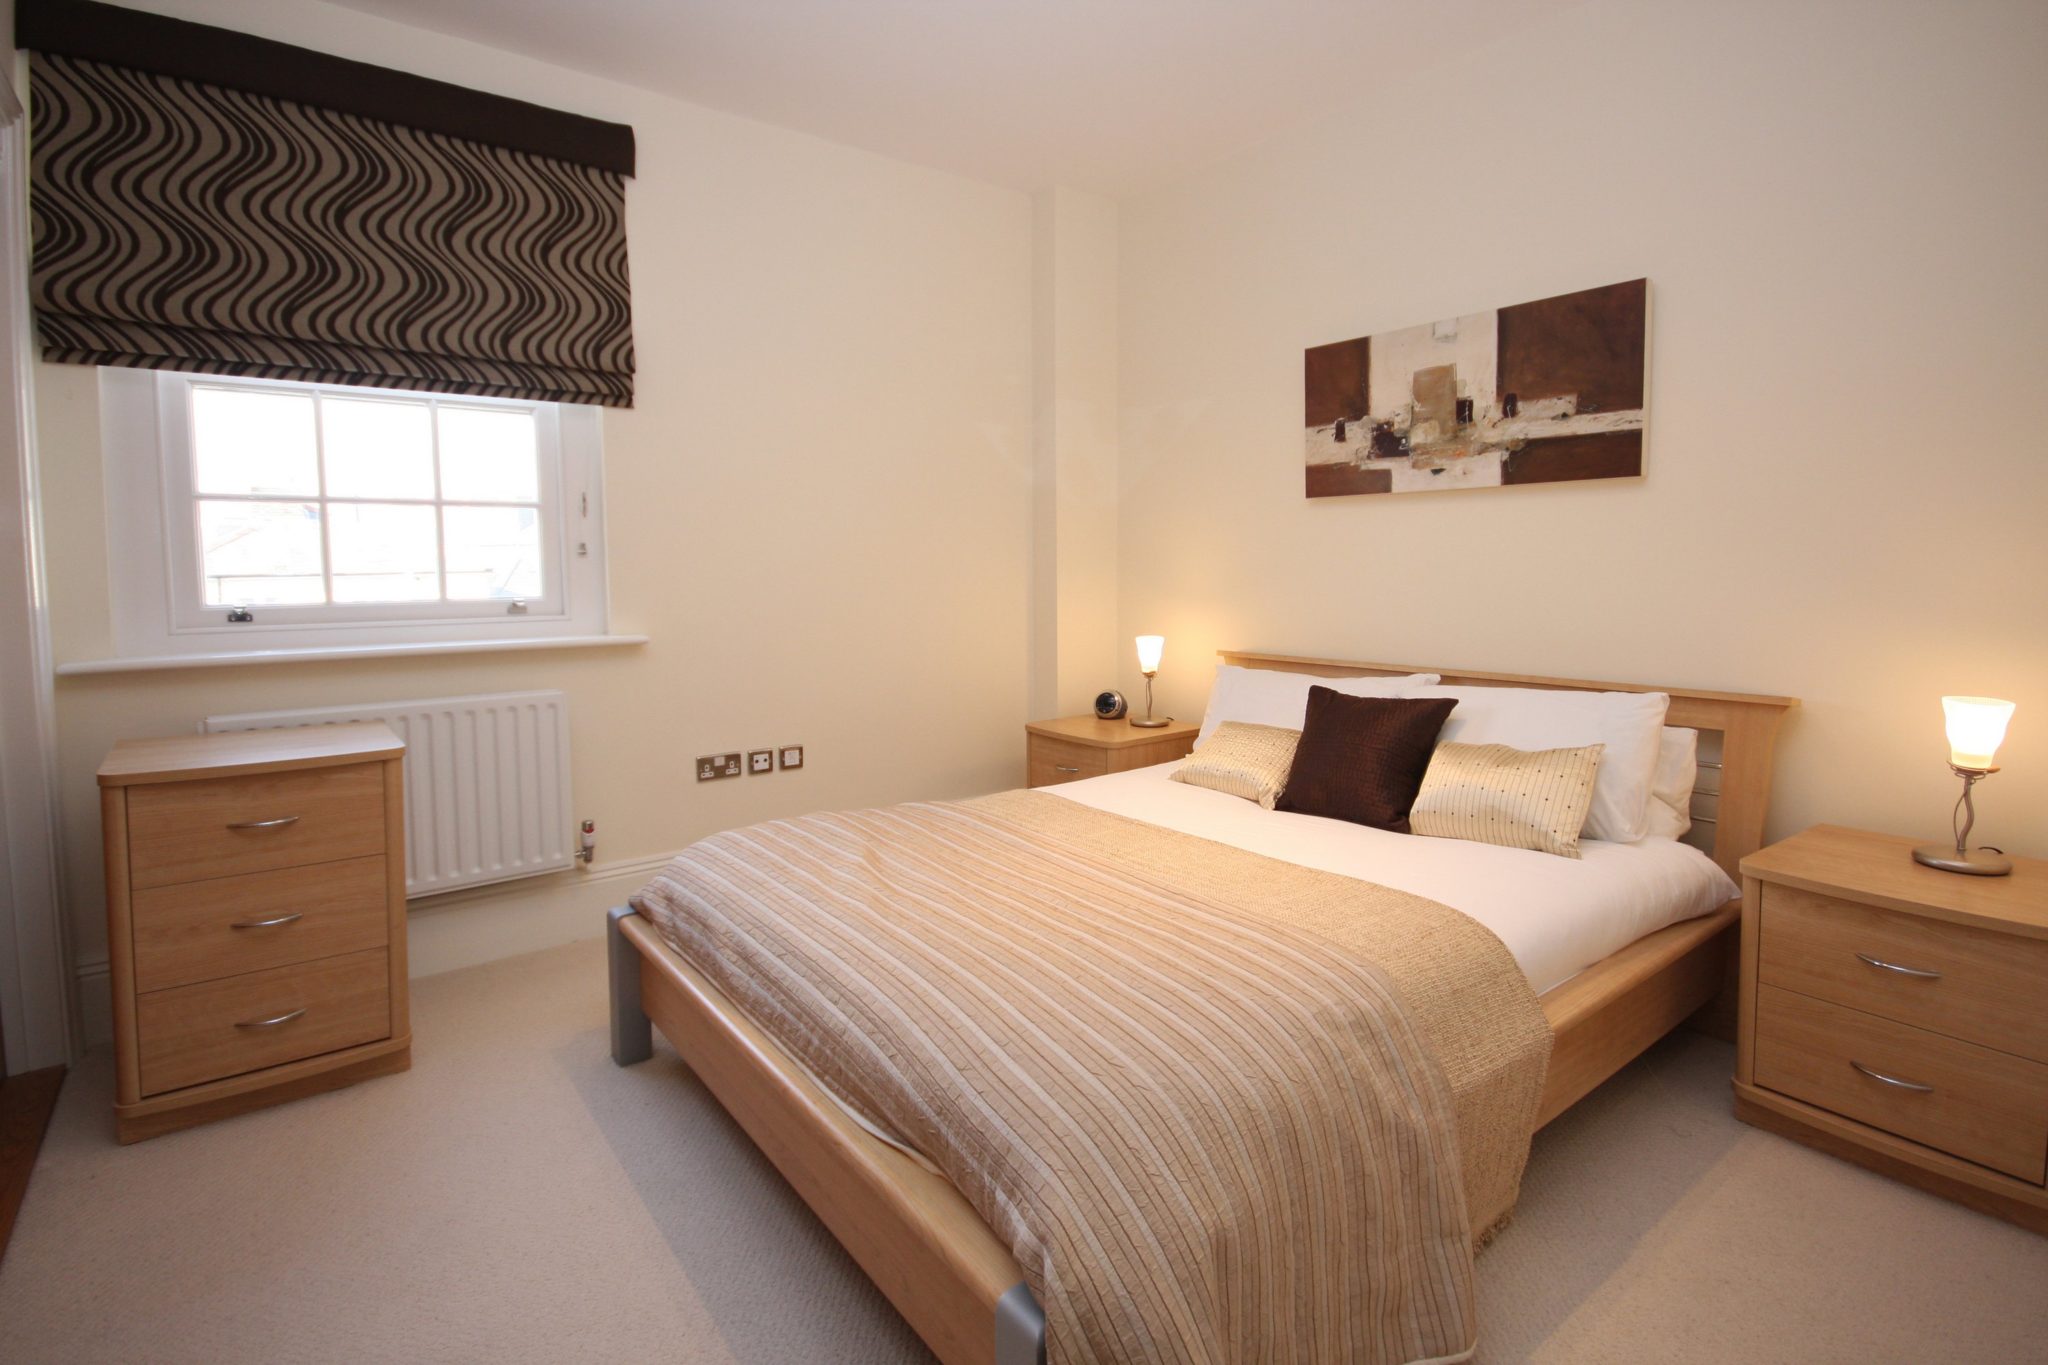 Serviced-Aparthotel-Reading,-Berkshire-available-NOW!-Book-Luxury-Corporate-Apartments-in-Reading-today!-Free-Wifi,-On-site-parking-and-weekly-housekeeping